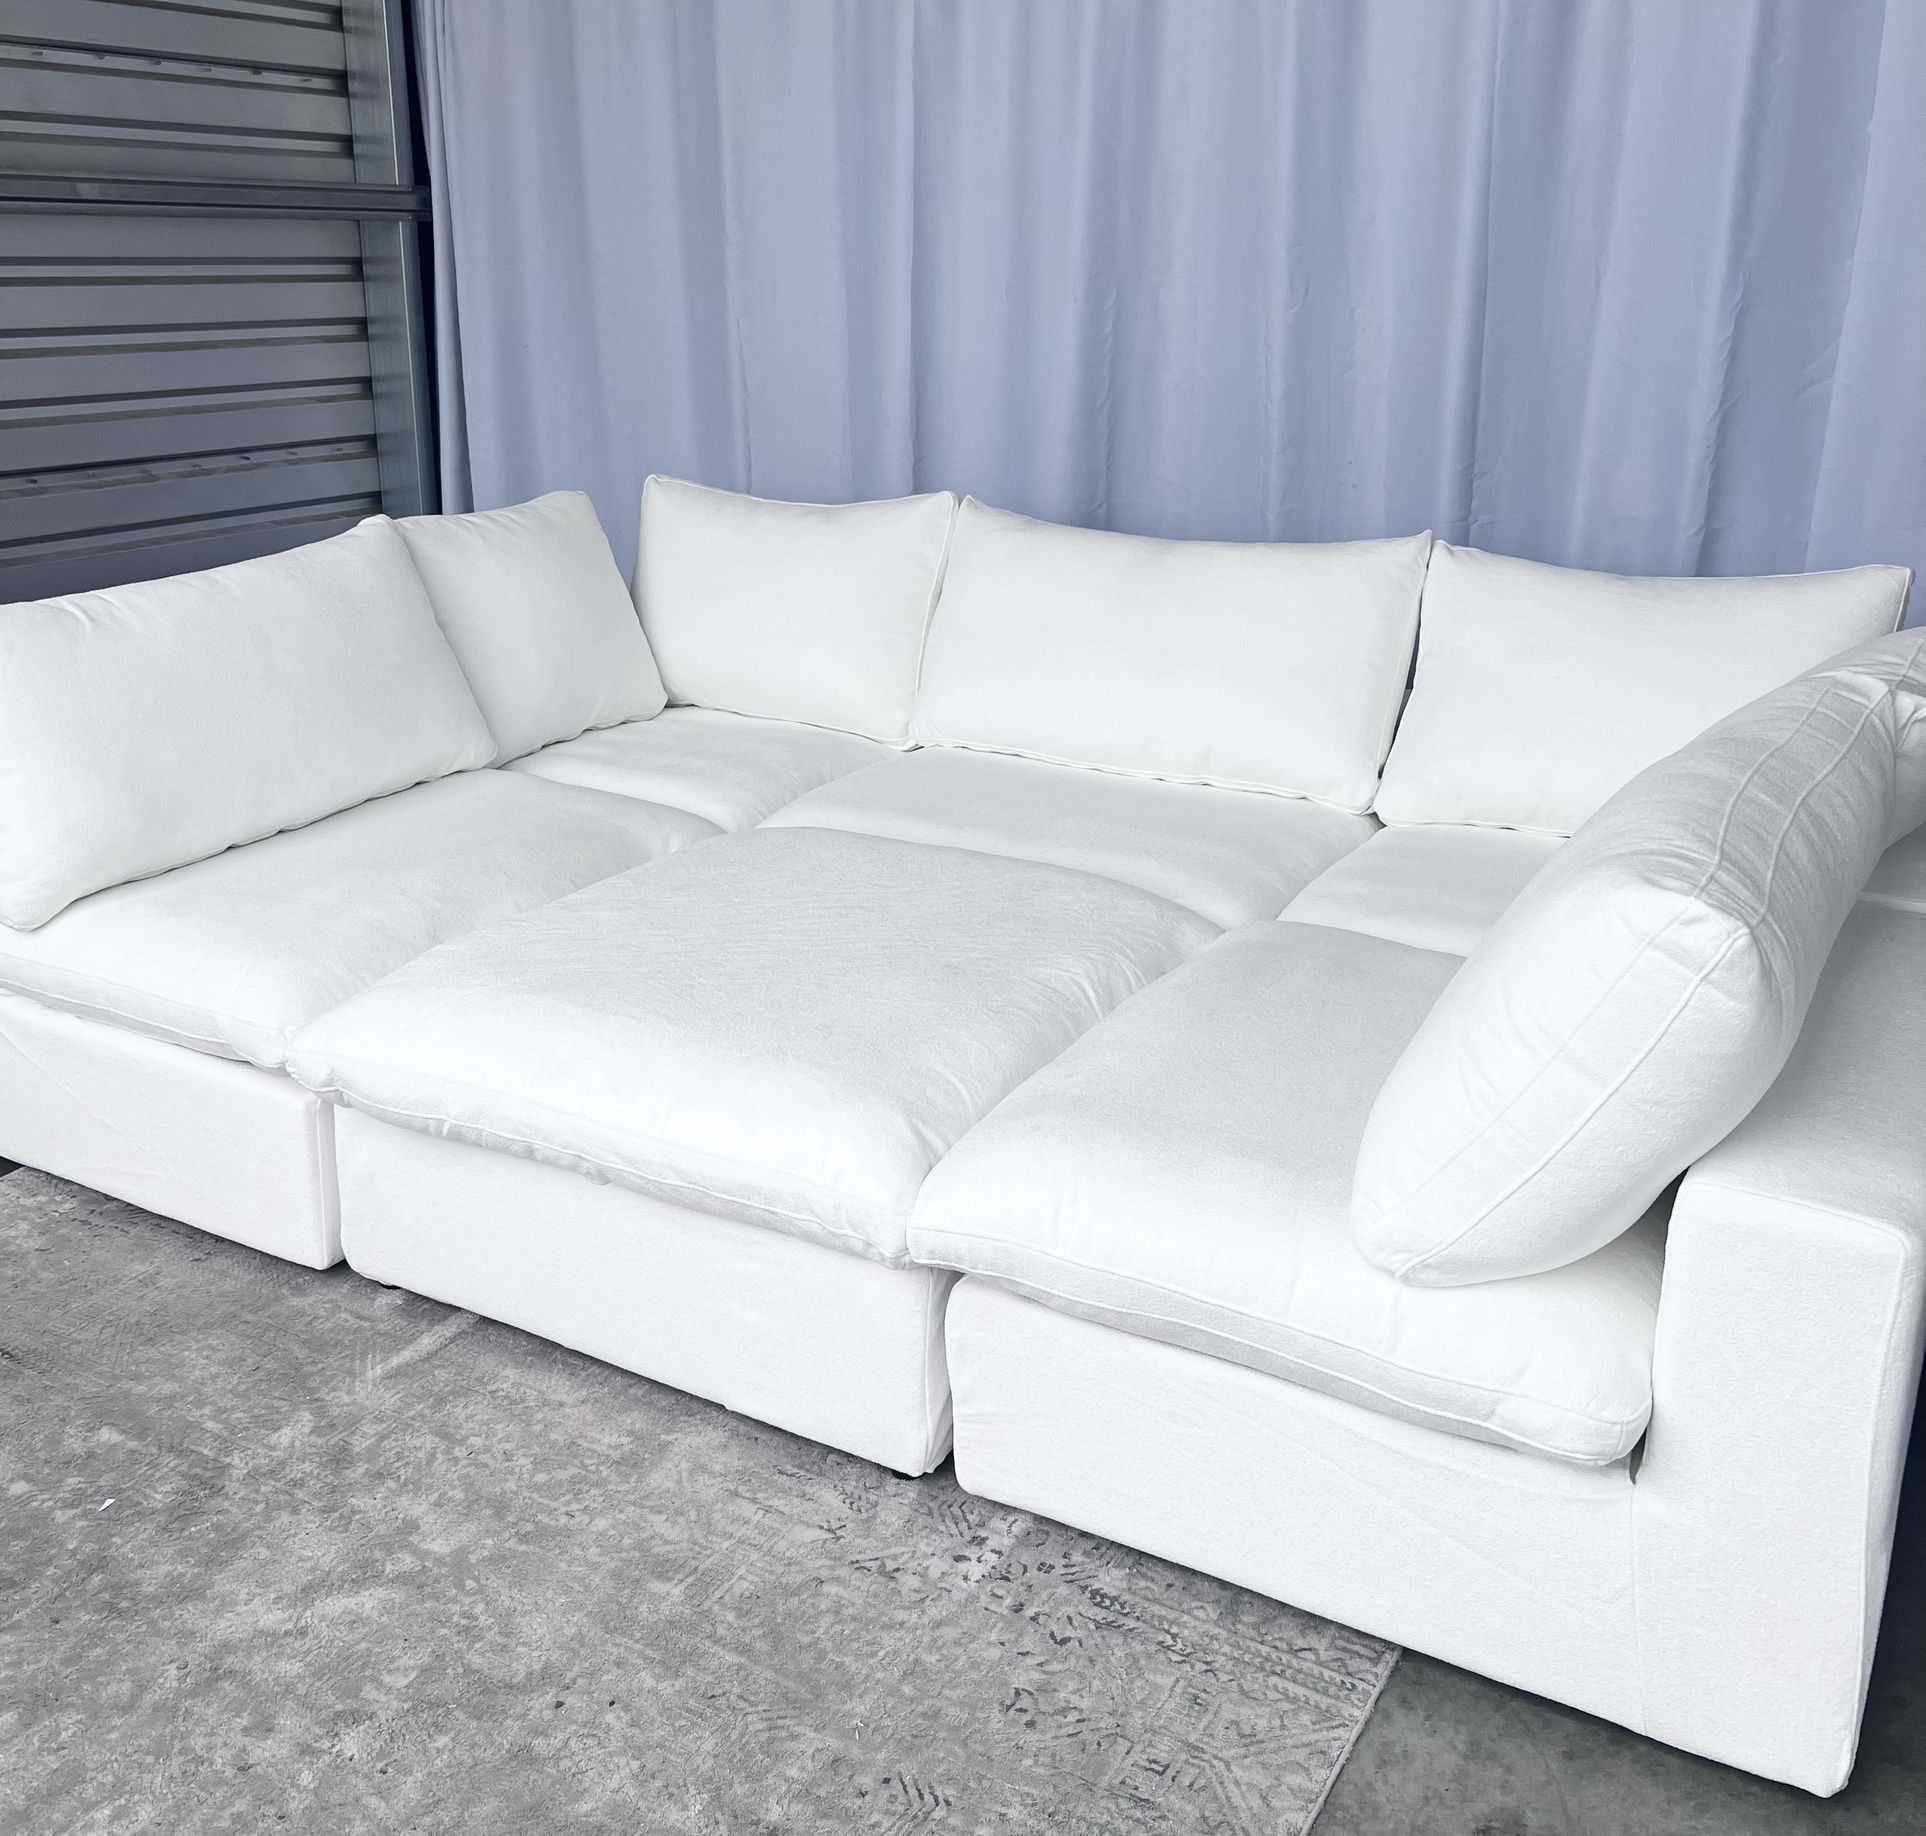 White Modular Cloud Couch Sectional 6 Piece Set (NEW IN BOX)